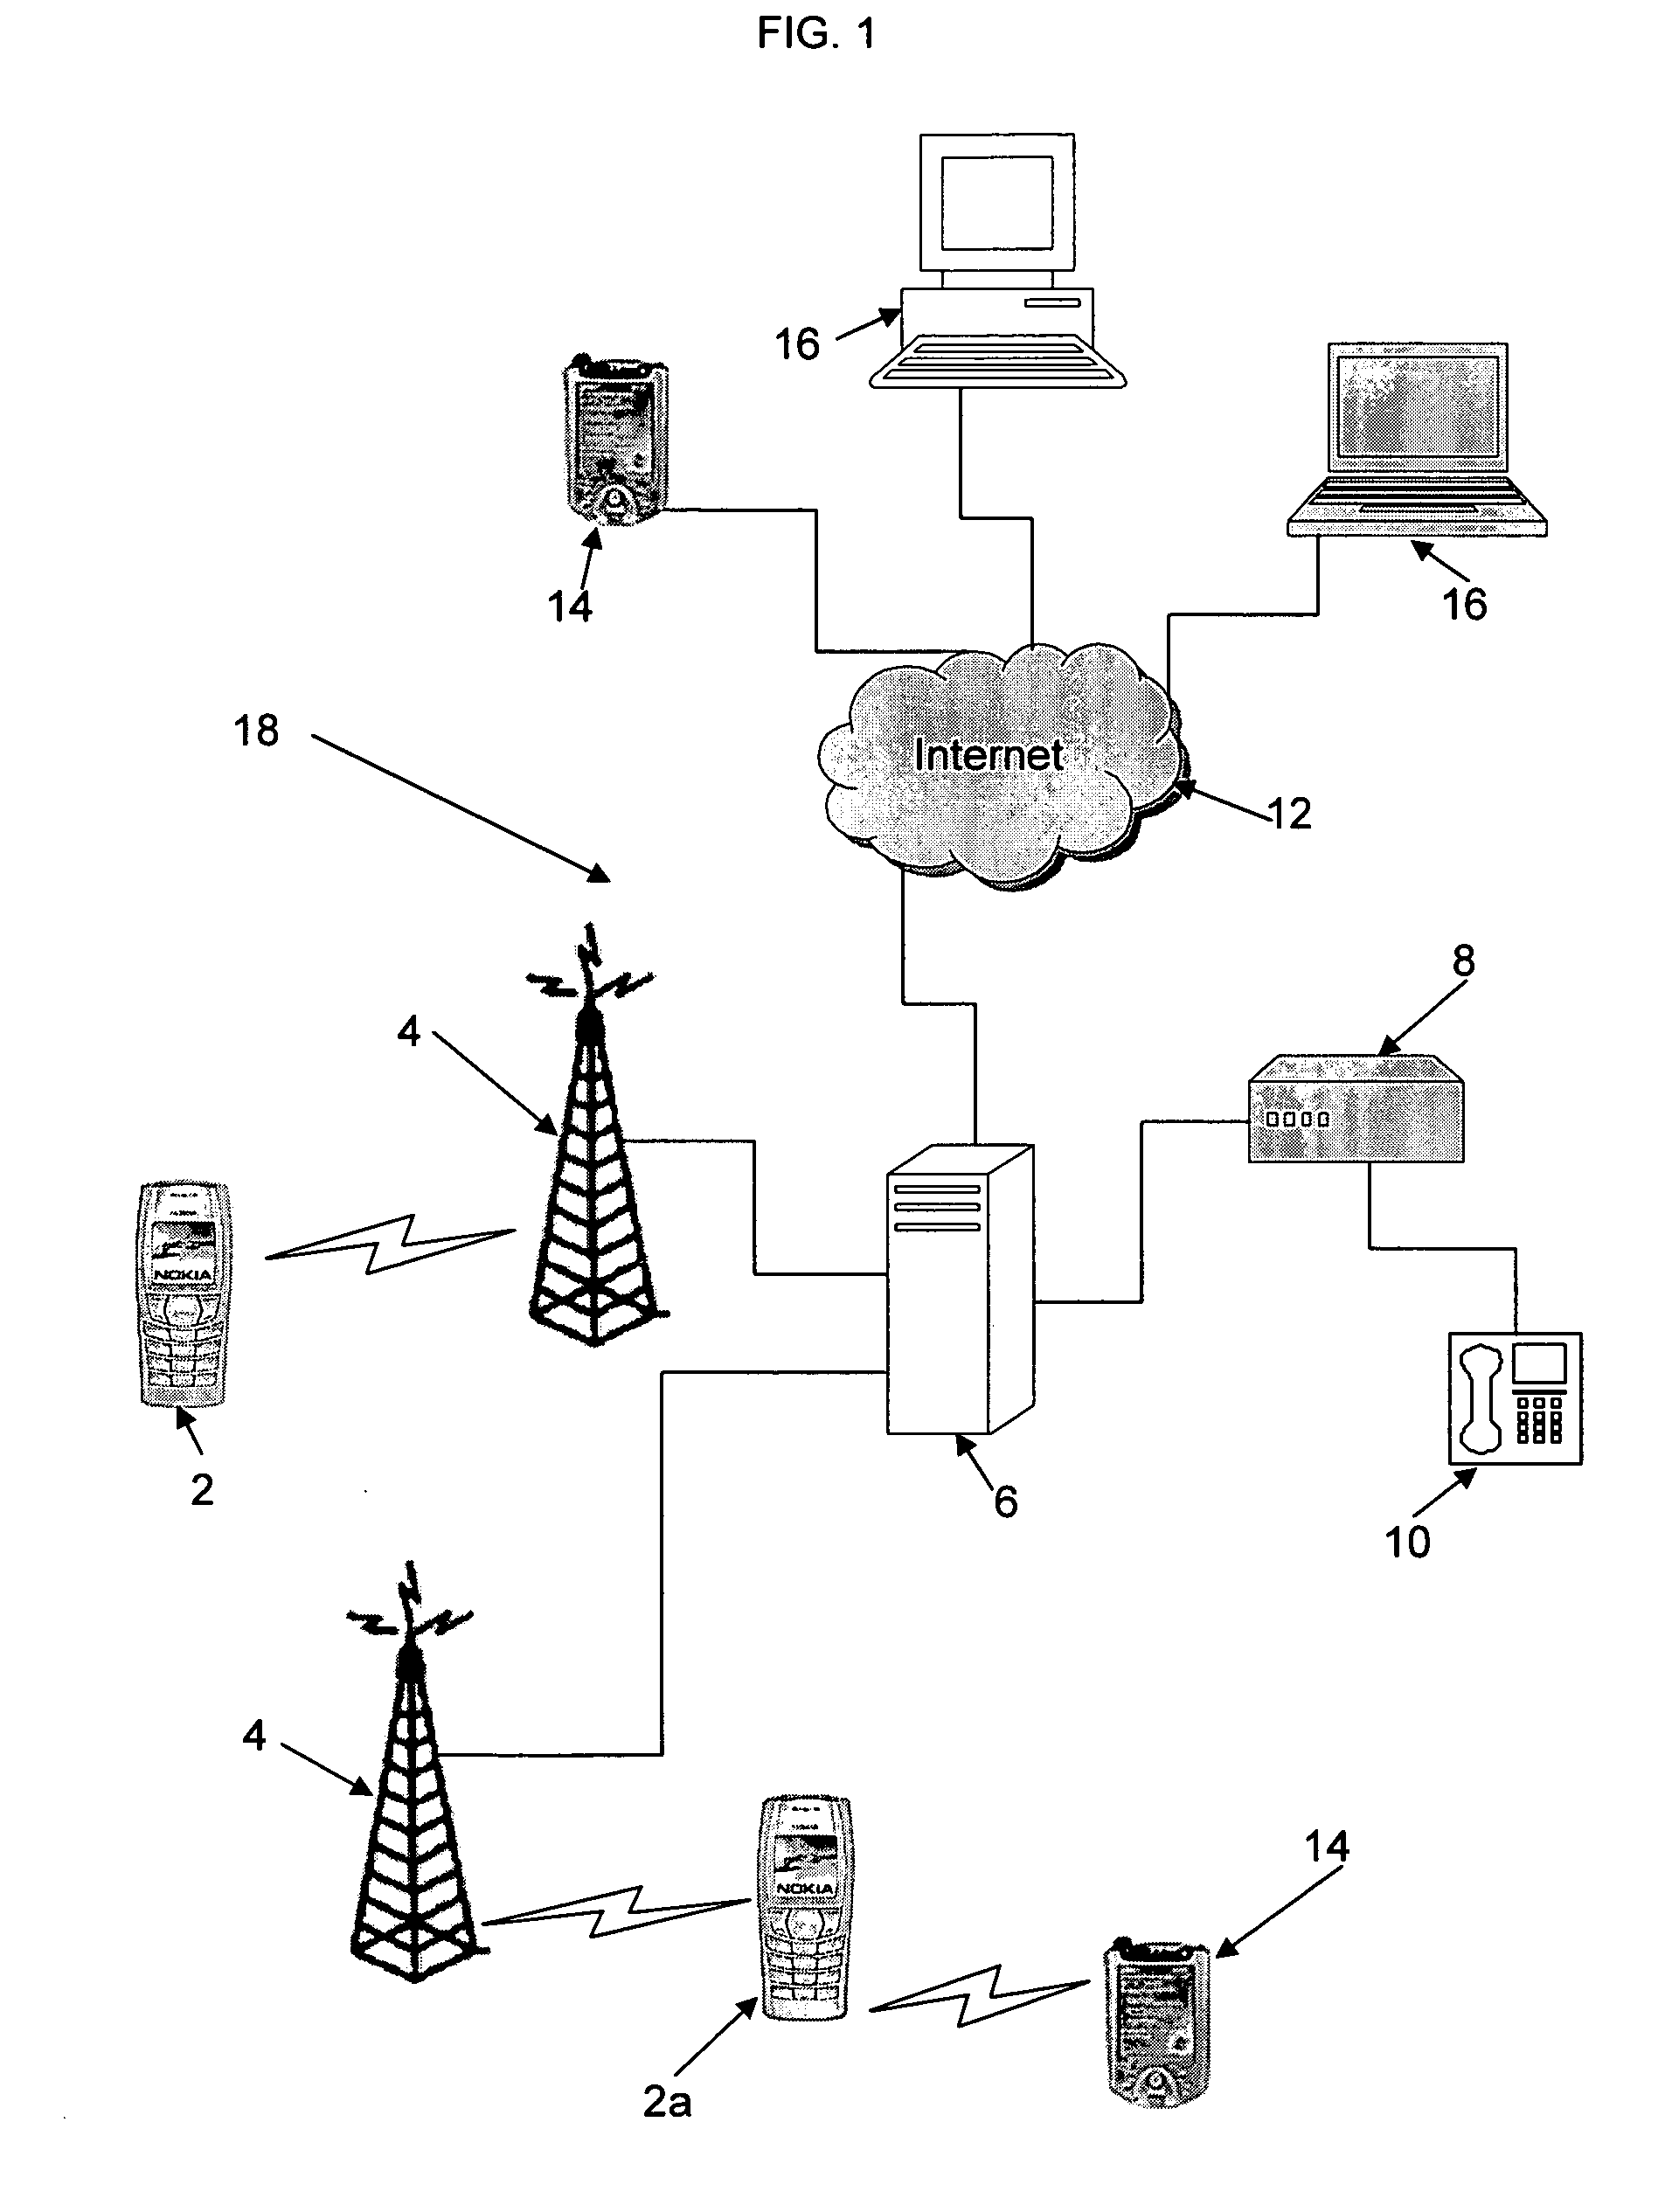 System and method for power management in a mobile communications device